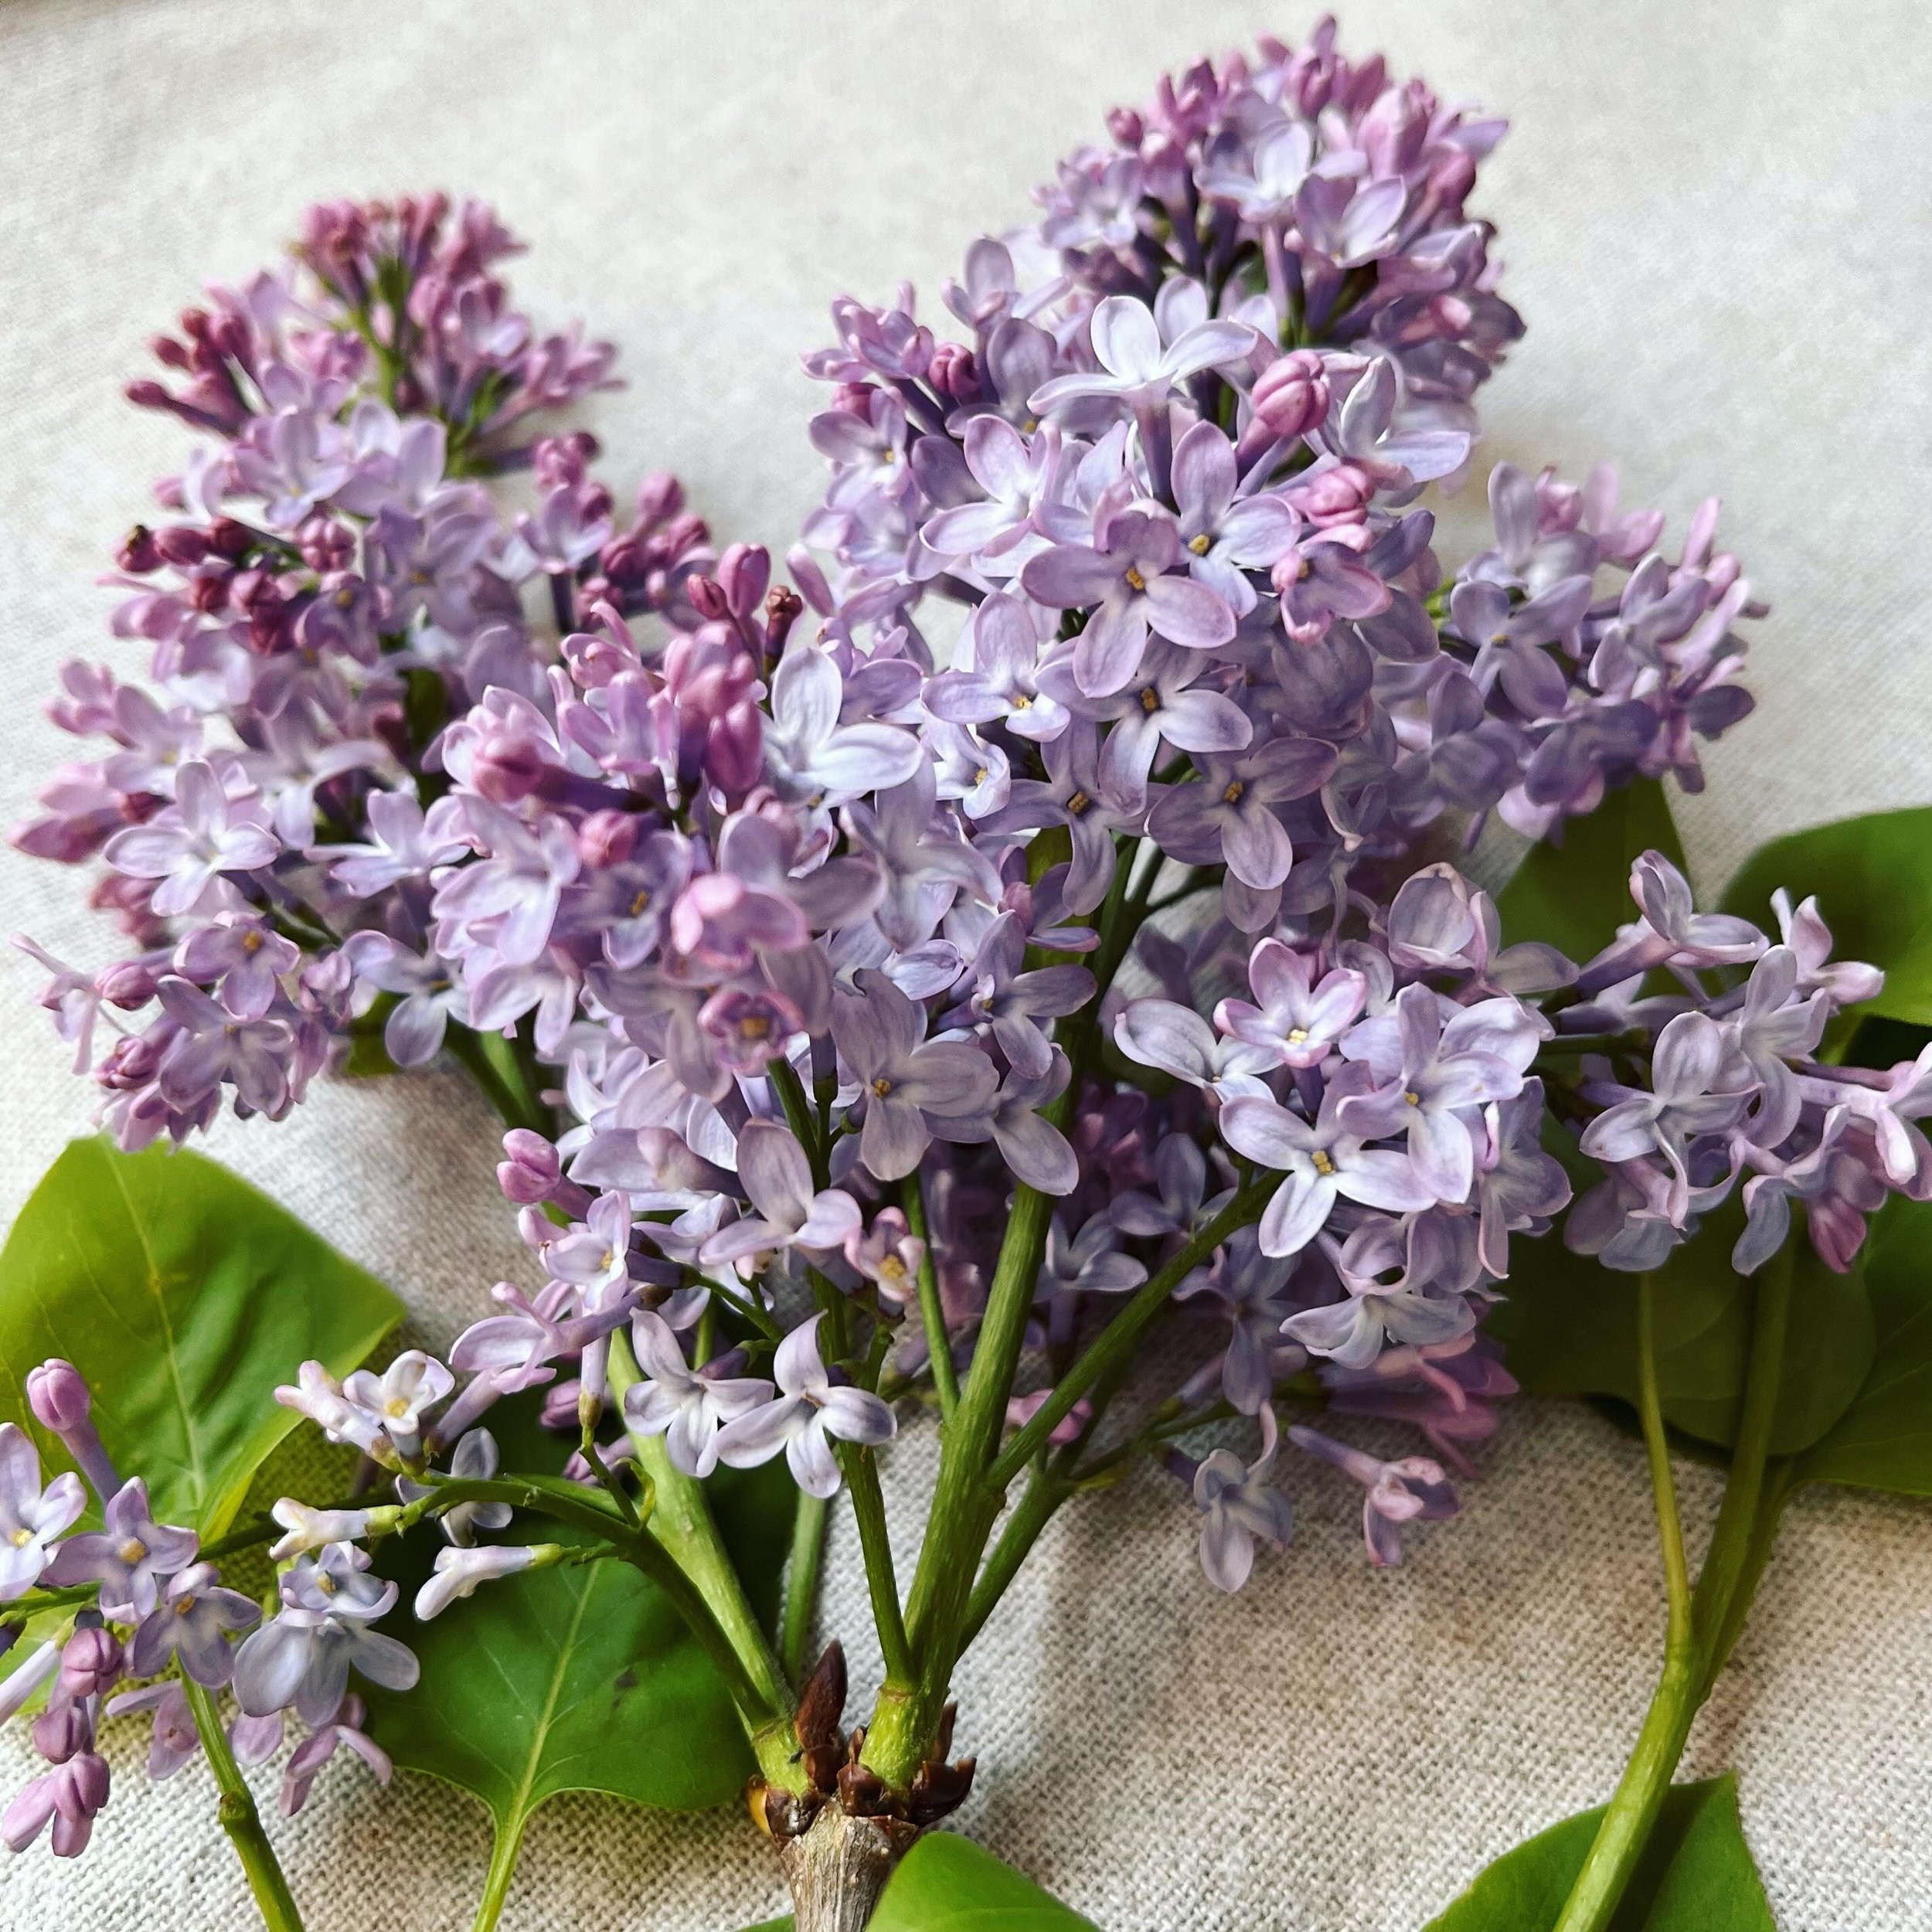 These lilacs are at their best, with a soft and gentle lilac palette, now that they are 3/4 open. 
Watch out for their fresh spring-note fragrance.

#springflorals #lilacs #natureinspired 🌿